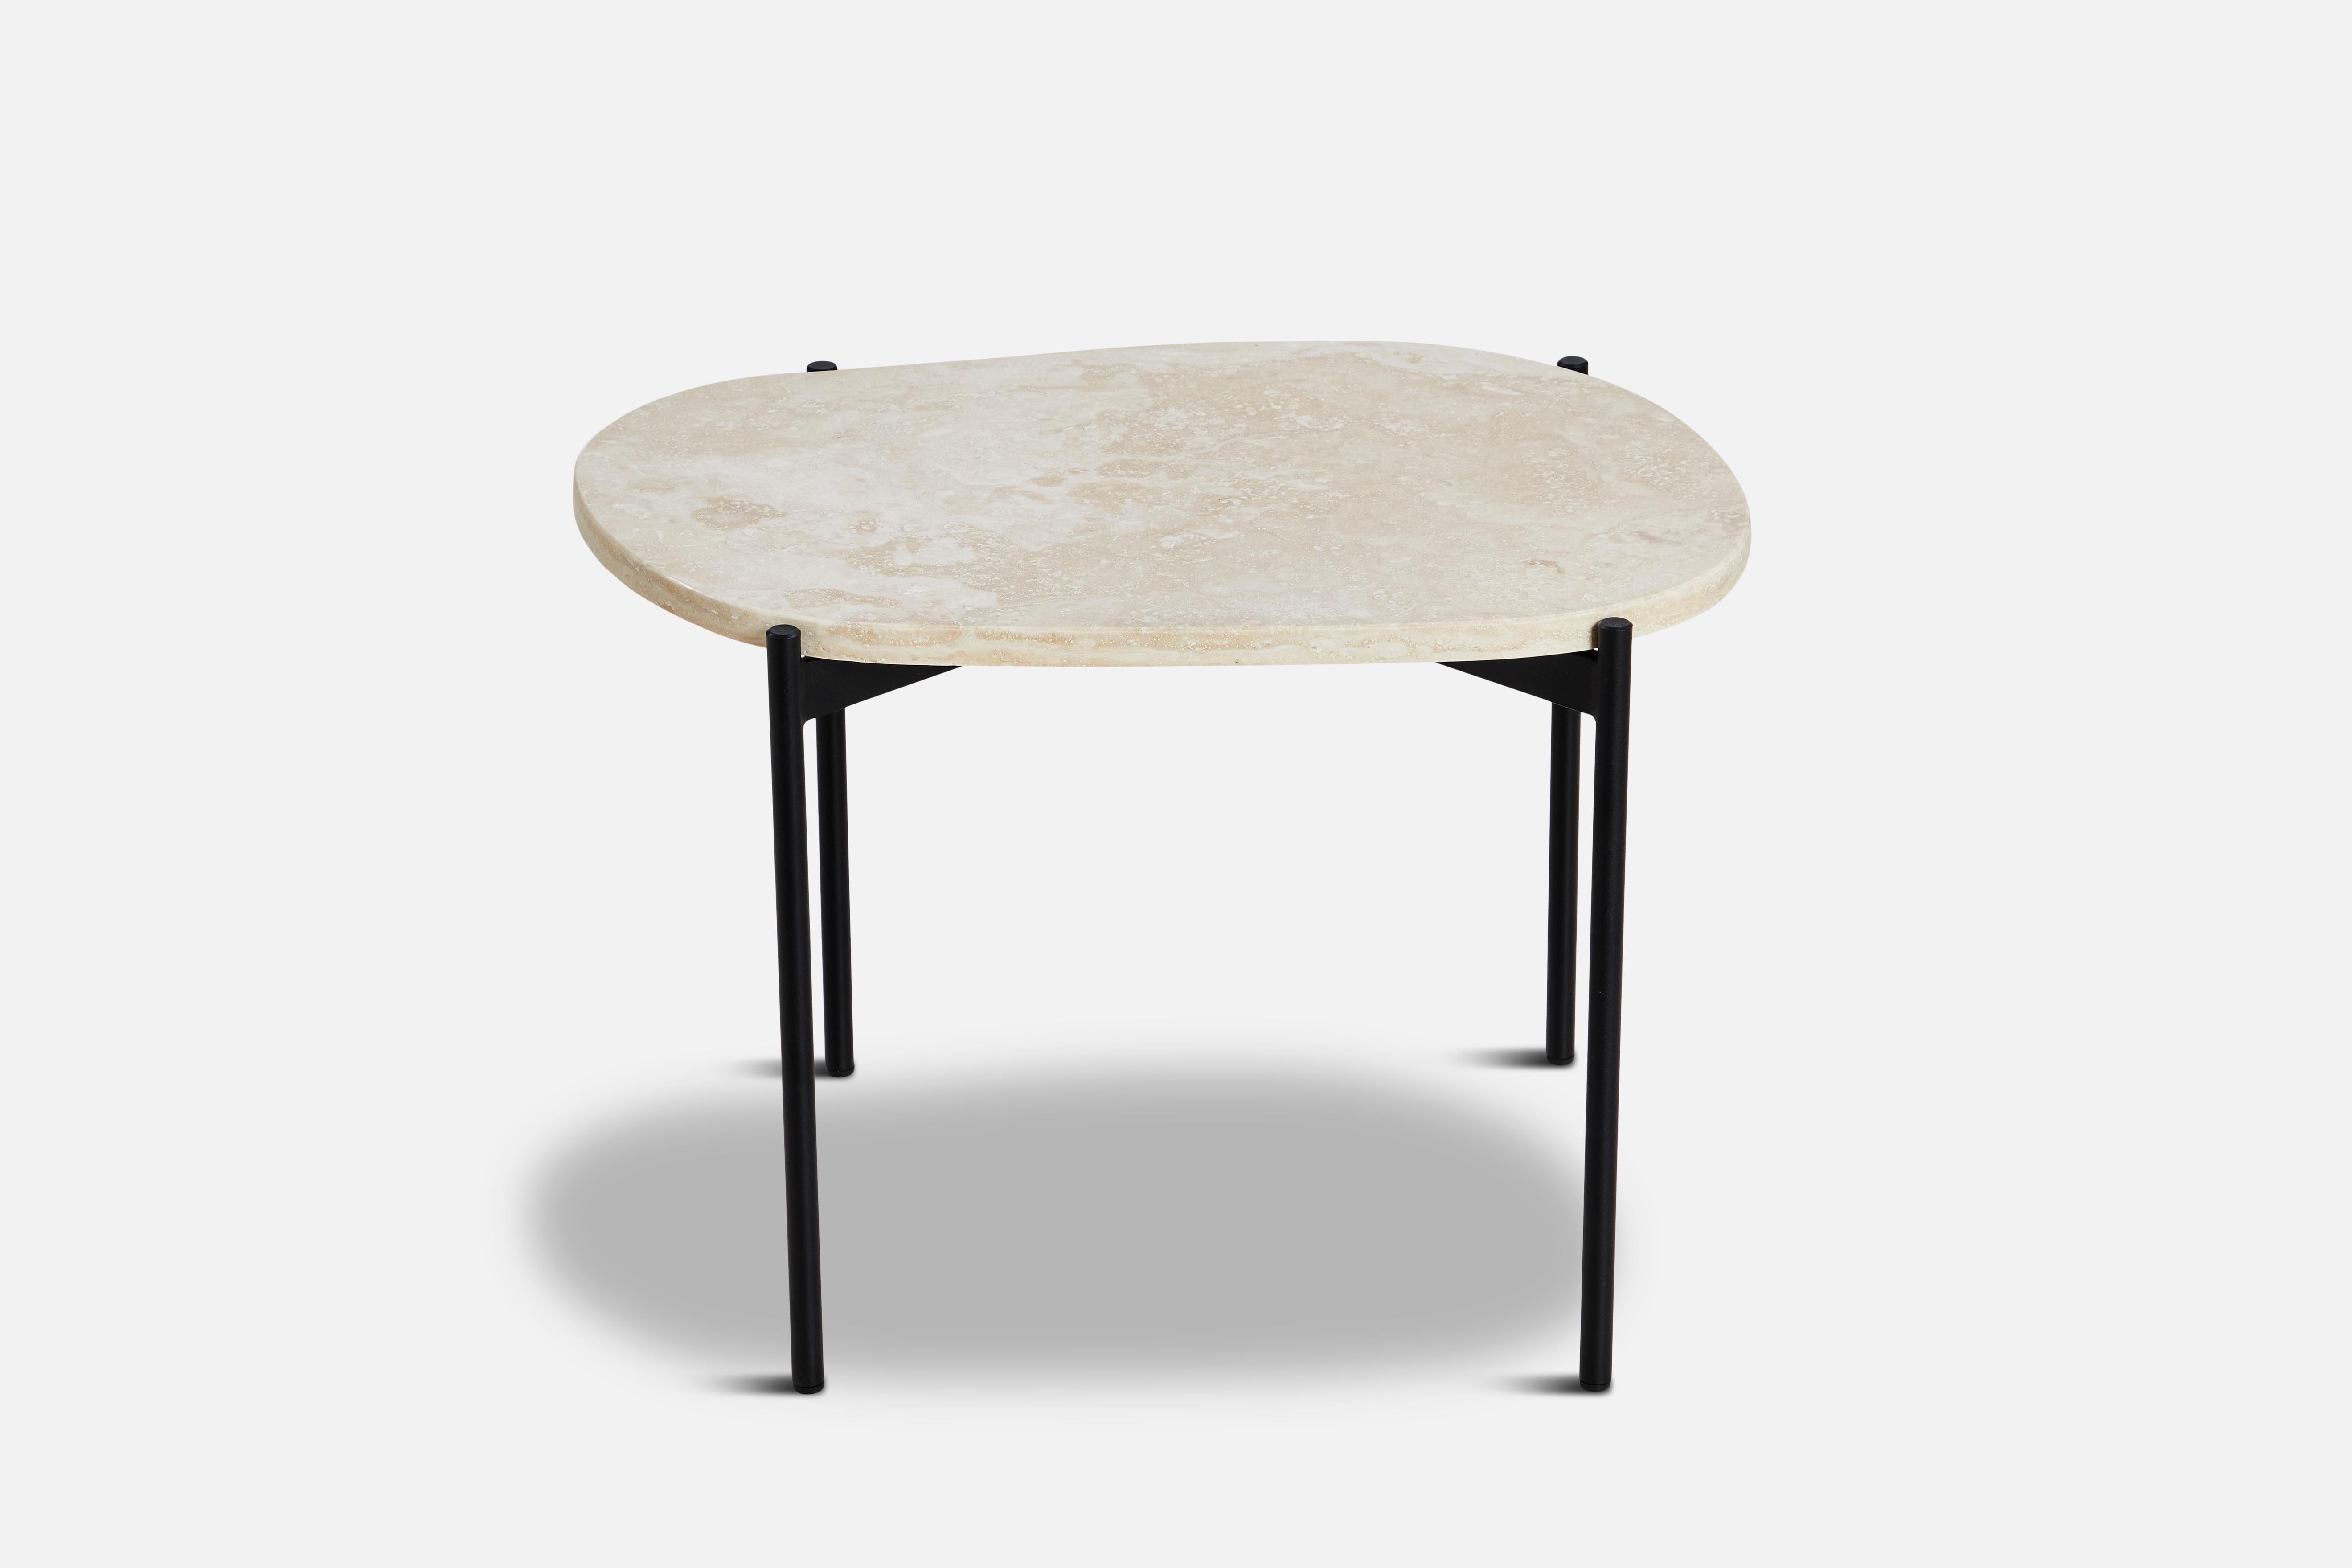 Ivory La Terra medium occasional table by Agnes Morguet
Materials: Metal, Ivory Travertine.
Dimensions: D 40.5 x W 57.2 x H 41 cm

The founders, Mia and Torben Koed, decided to put their 30 years of experience into a new project. It was time for